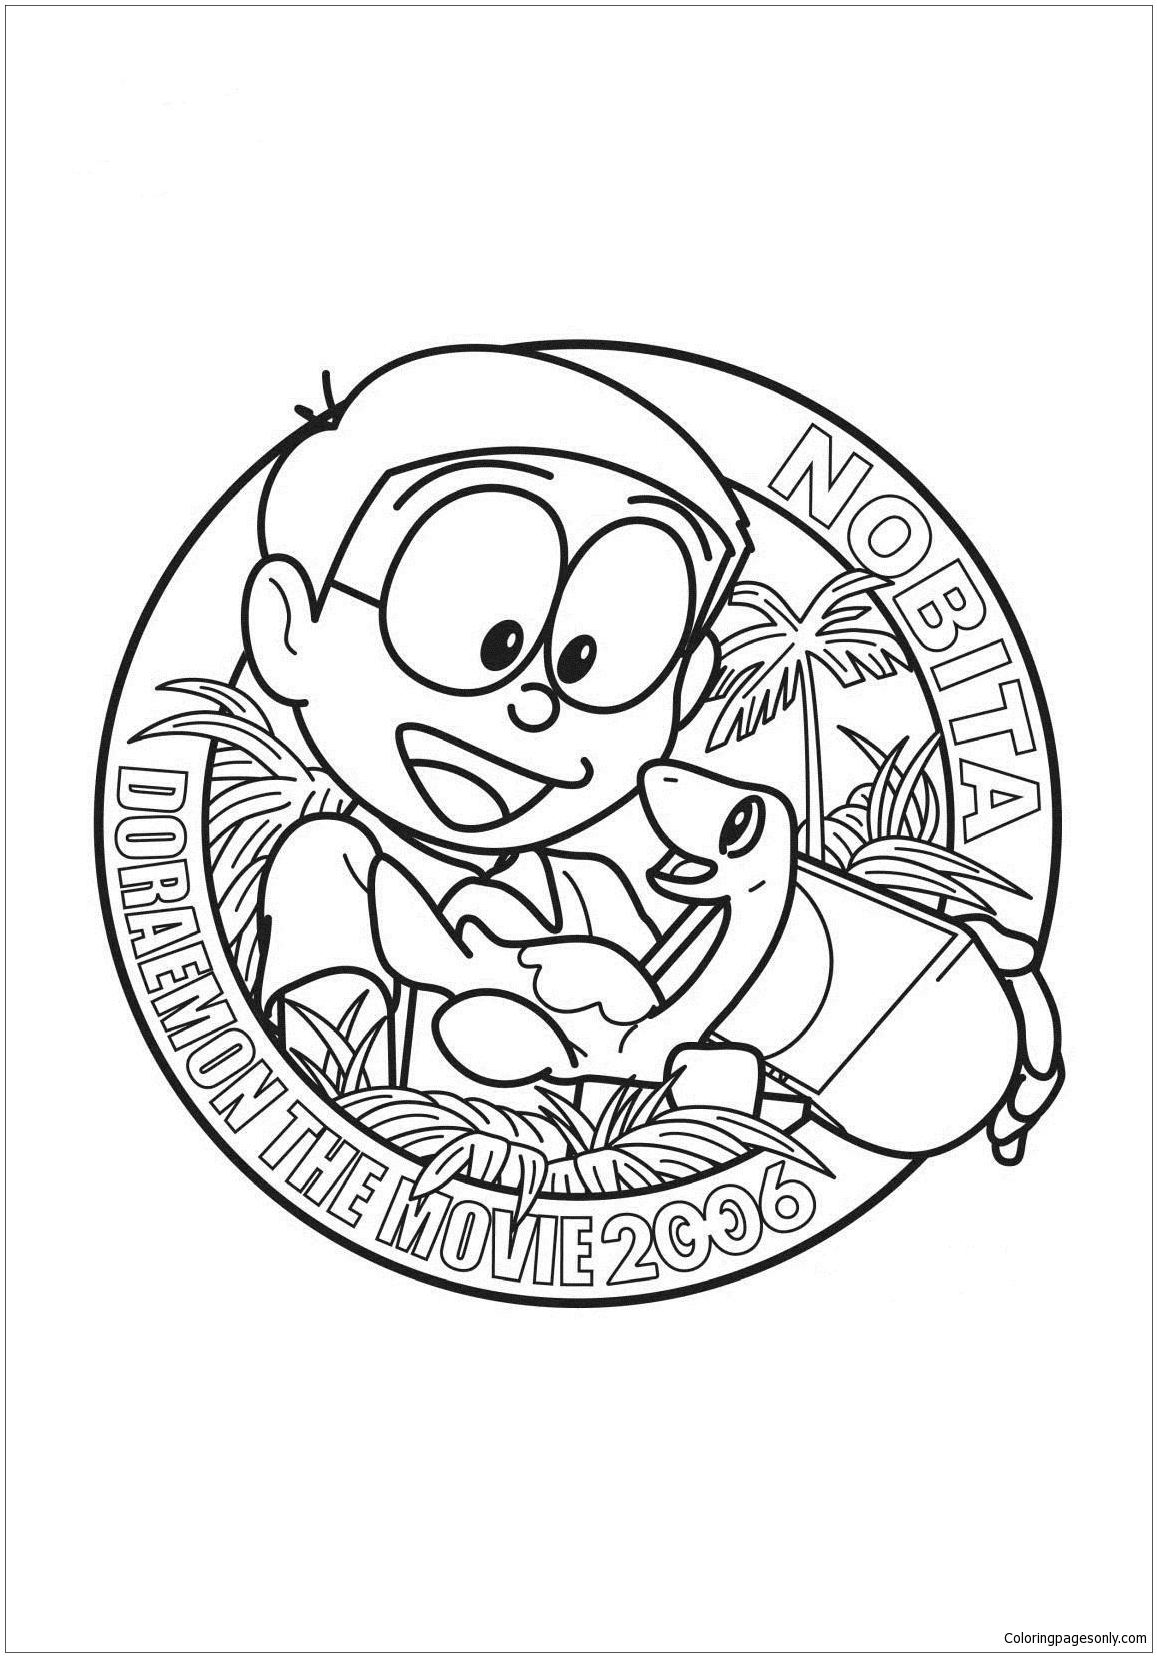 Download Nobita In Doraemon The Movie Coloring Page - Free Coloring Pages Online